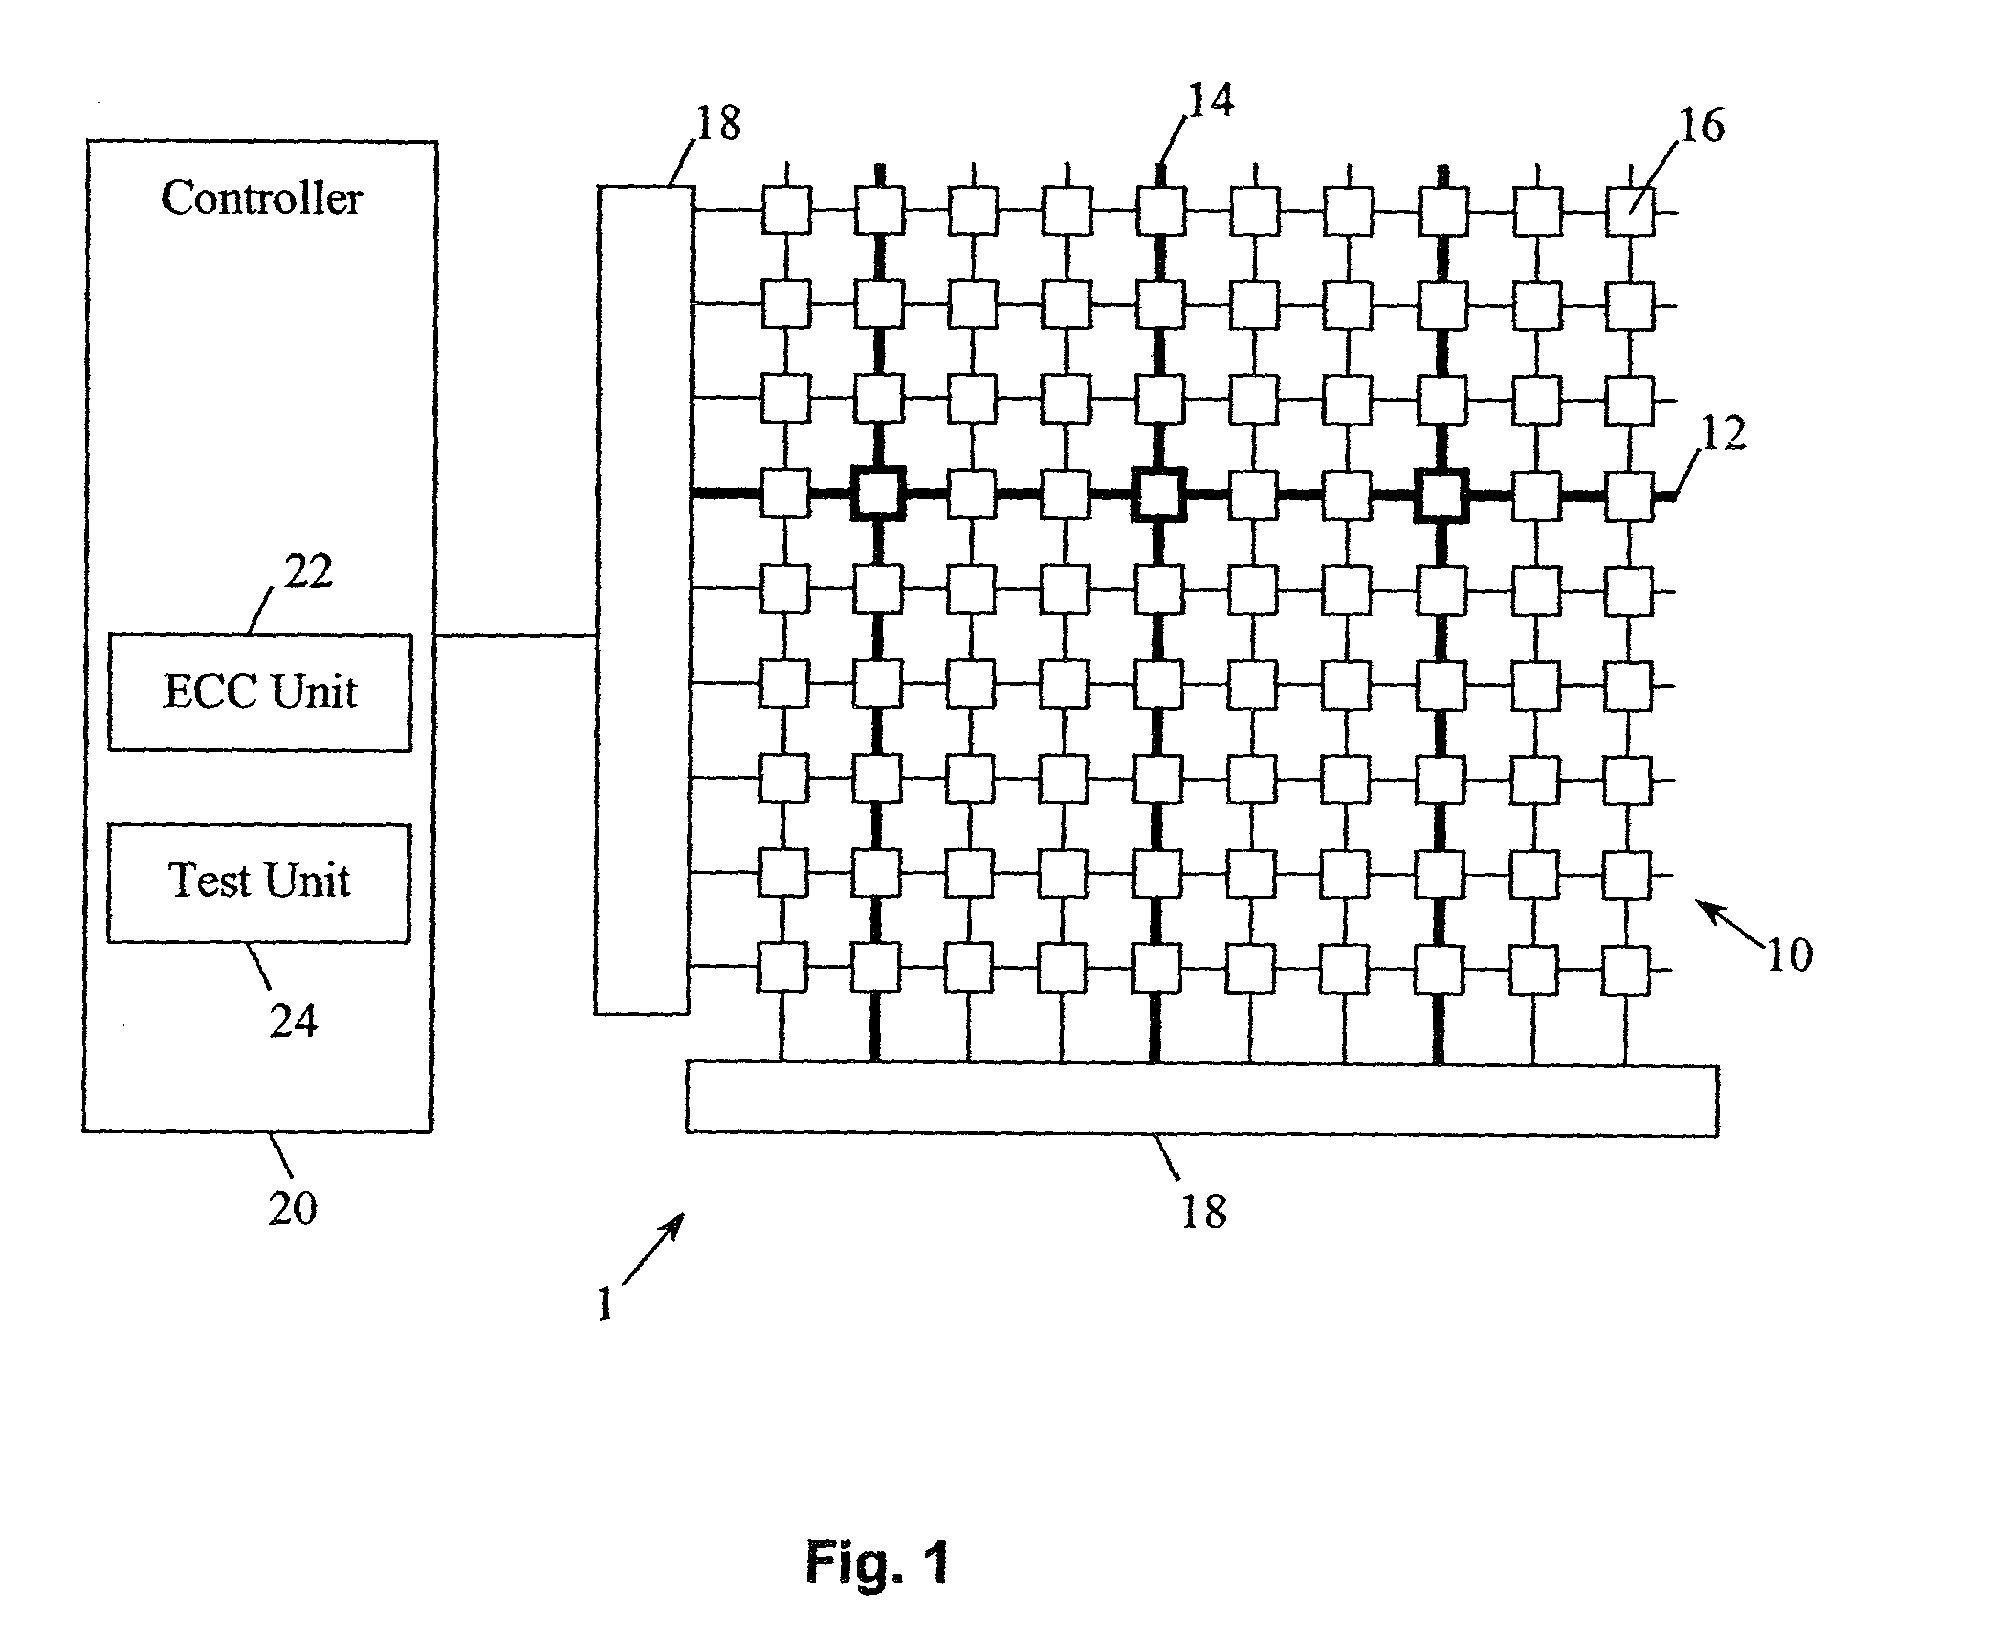 Manufacturing test for a fault tolerant magnetoresistive solid-state storage device